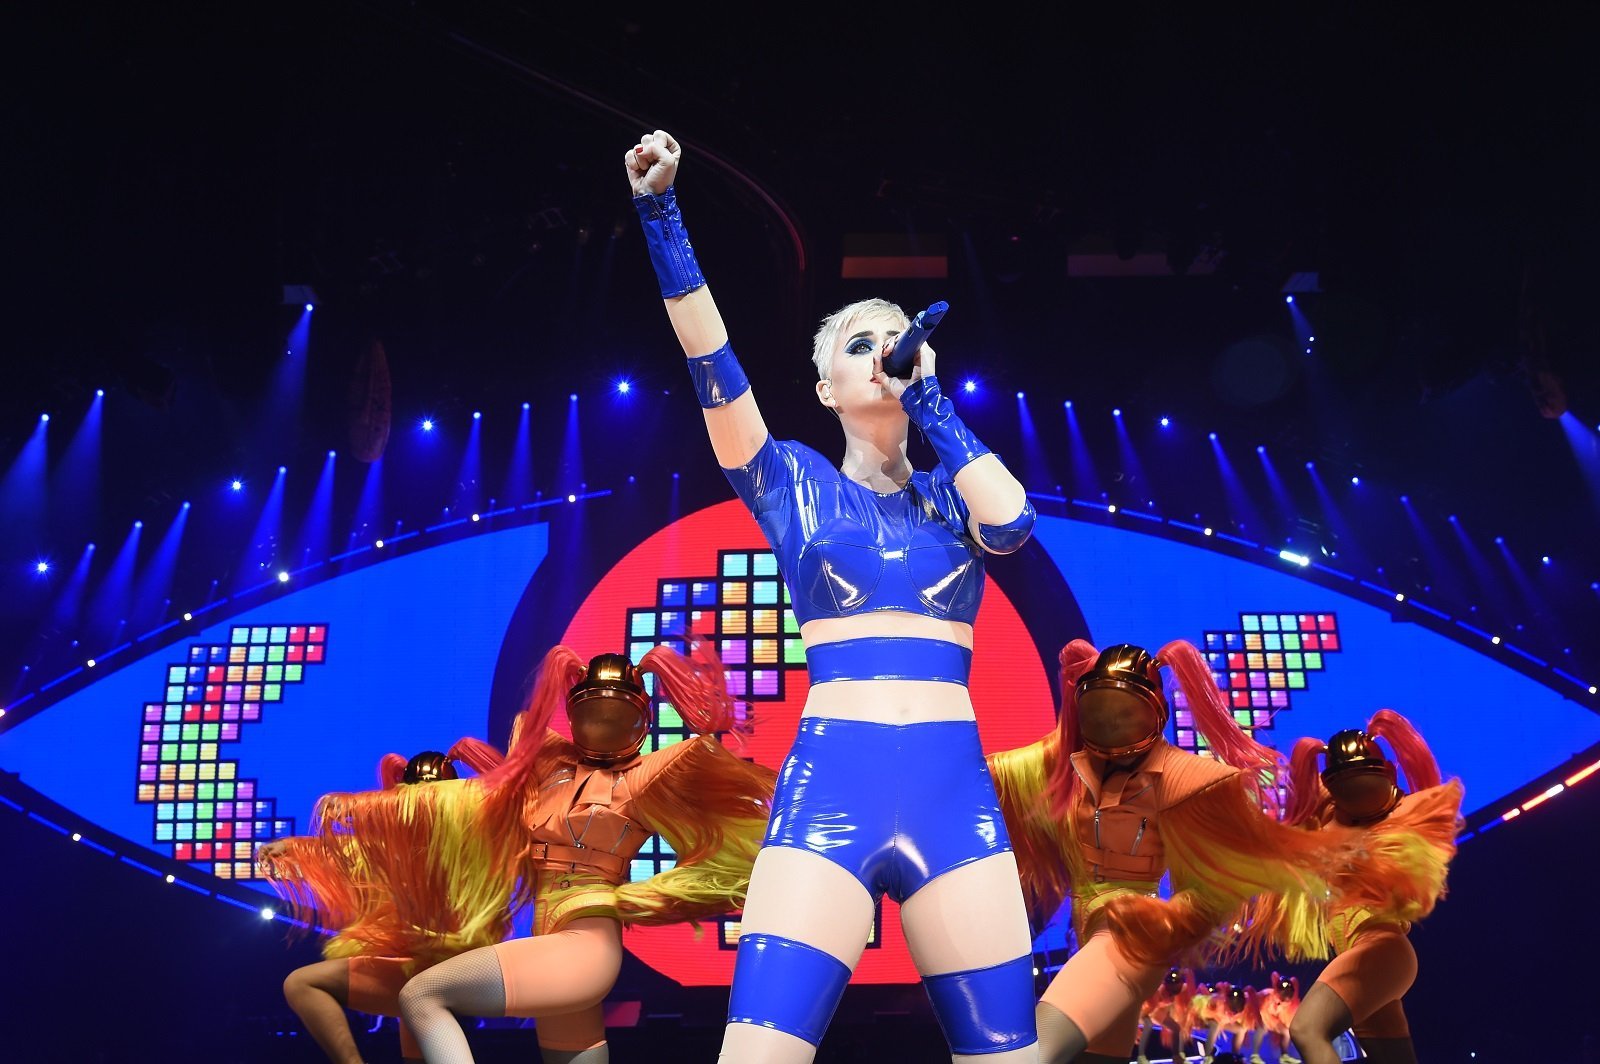 Tetris Featured in Katy Perry's Latest Tour